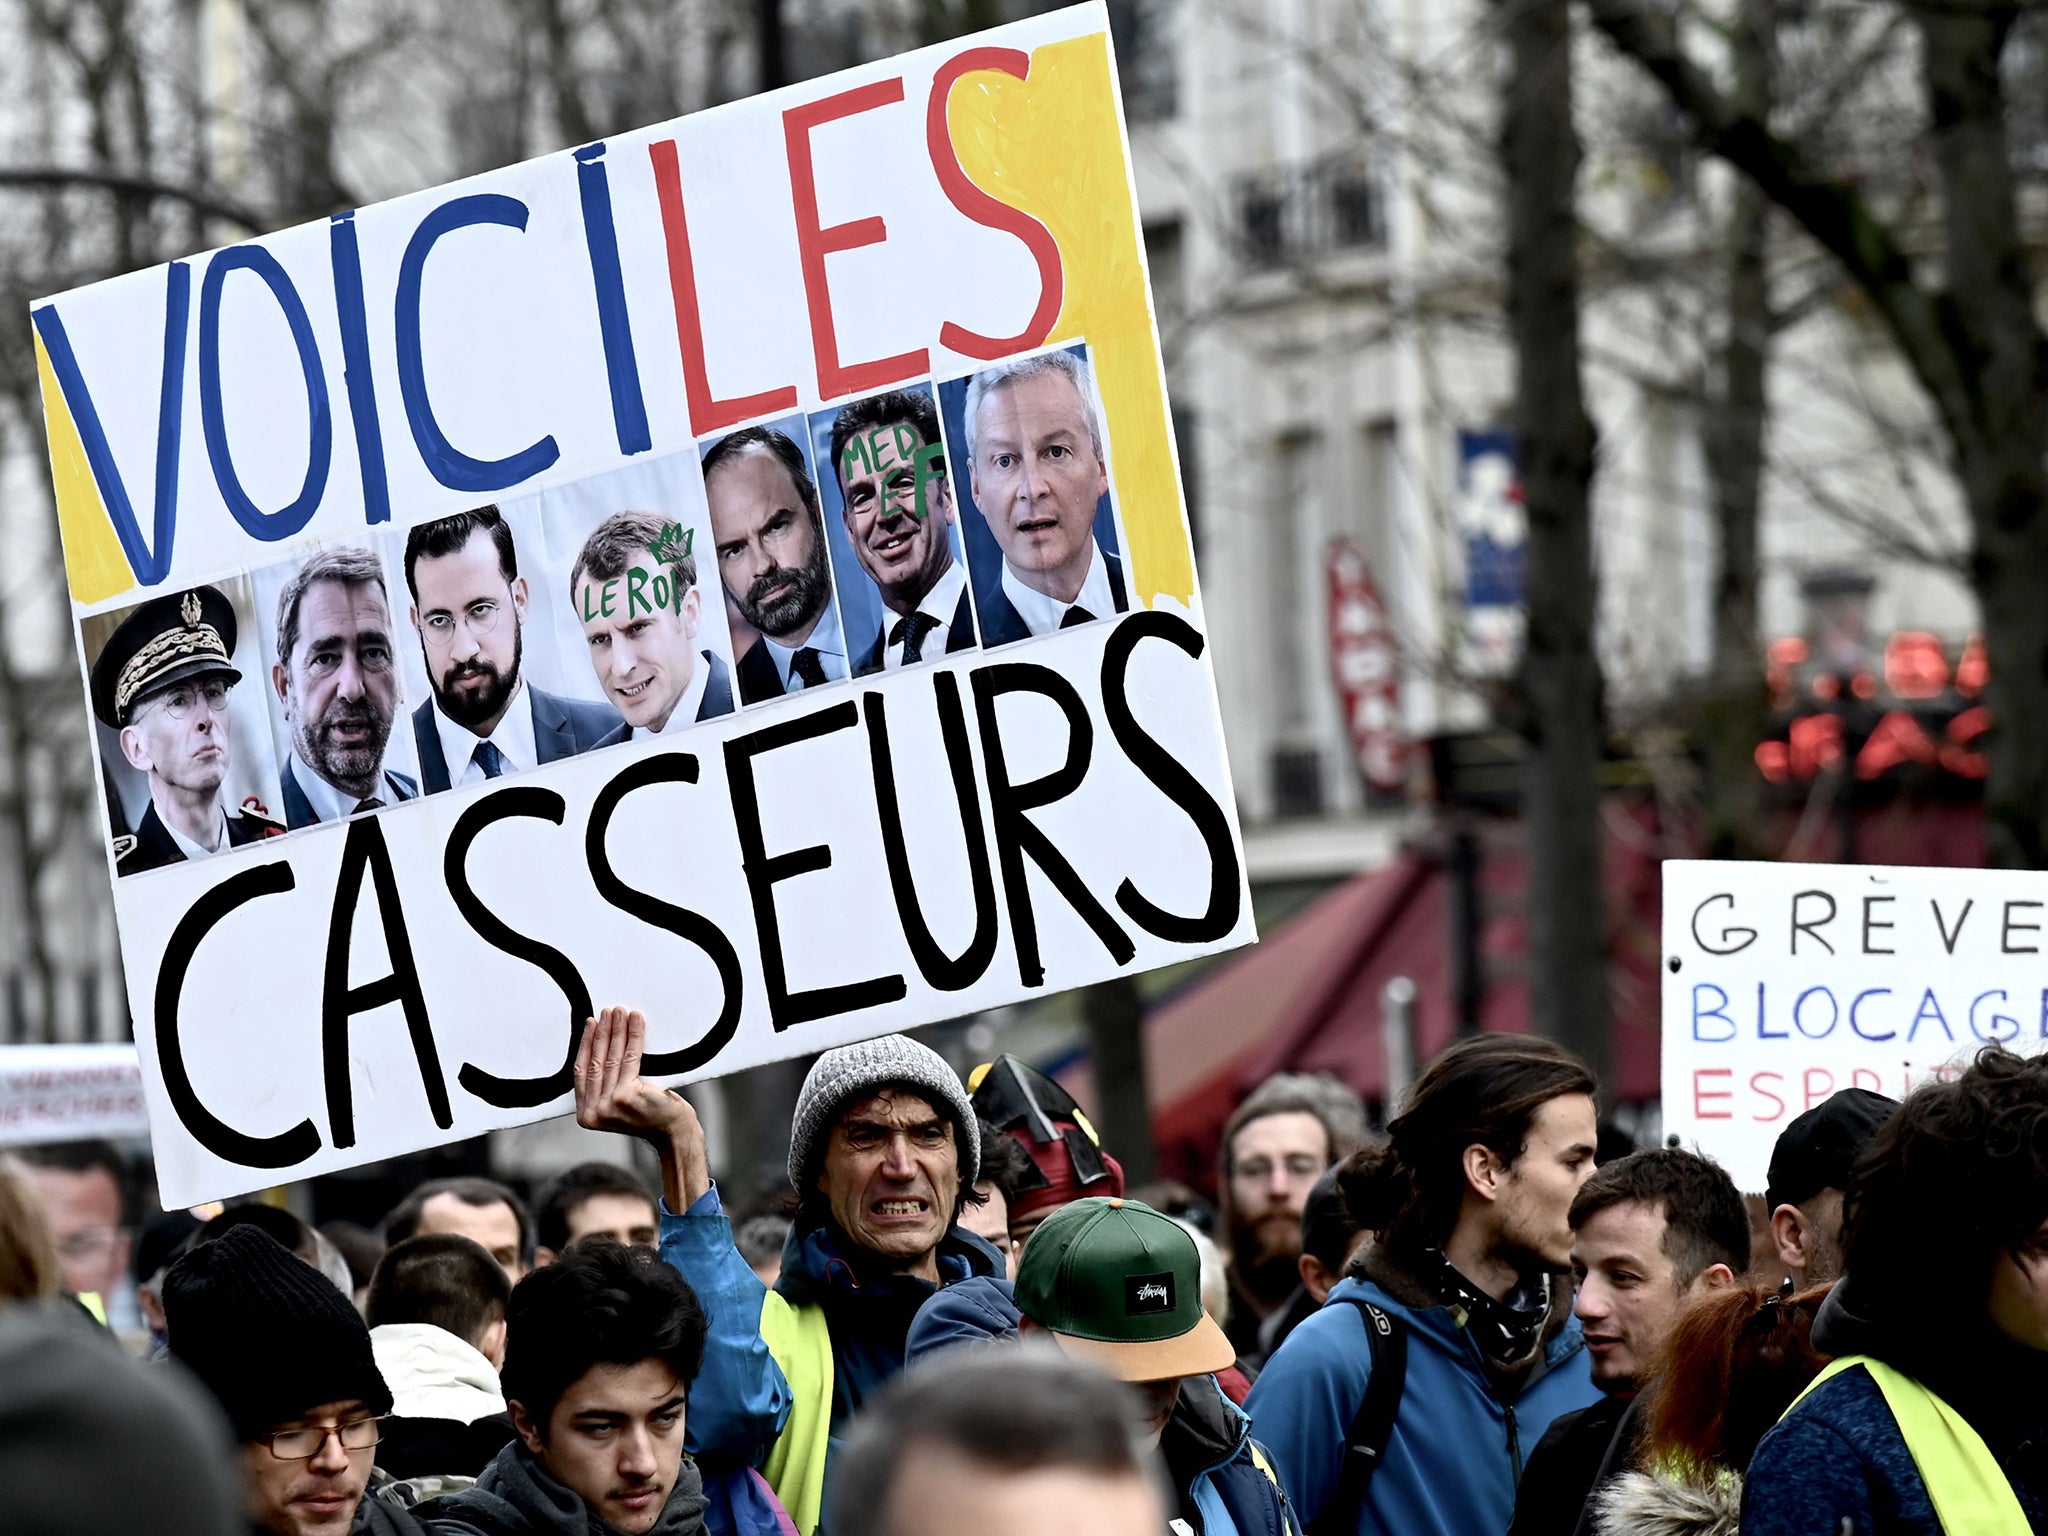 Demonstrations take place a year after the original yellow vest movement in 2018, which saw a number of violent clashes with police